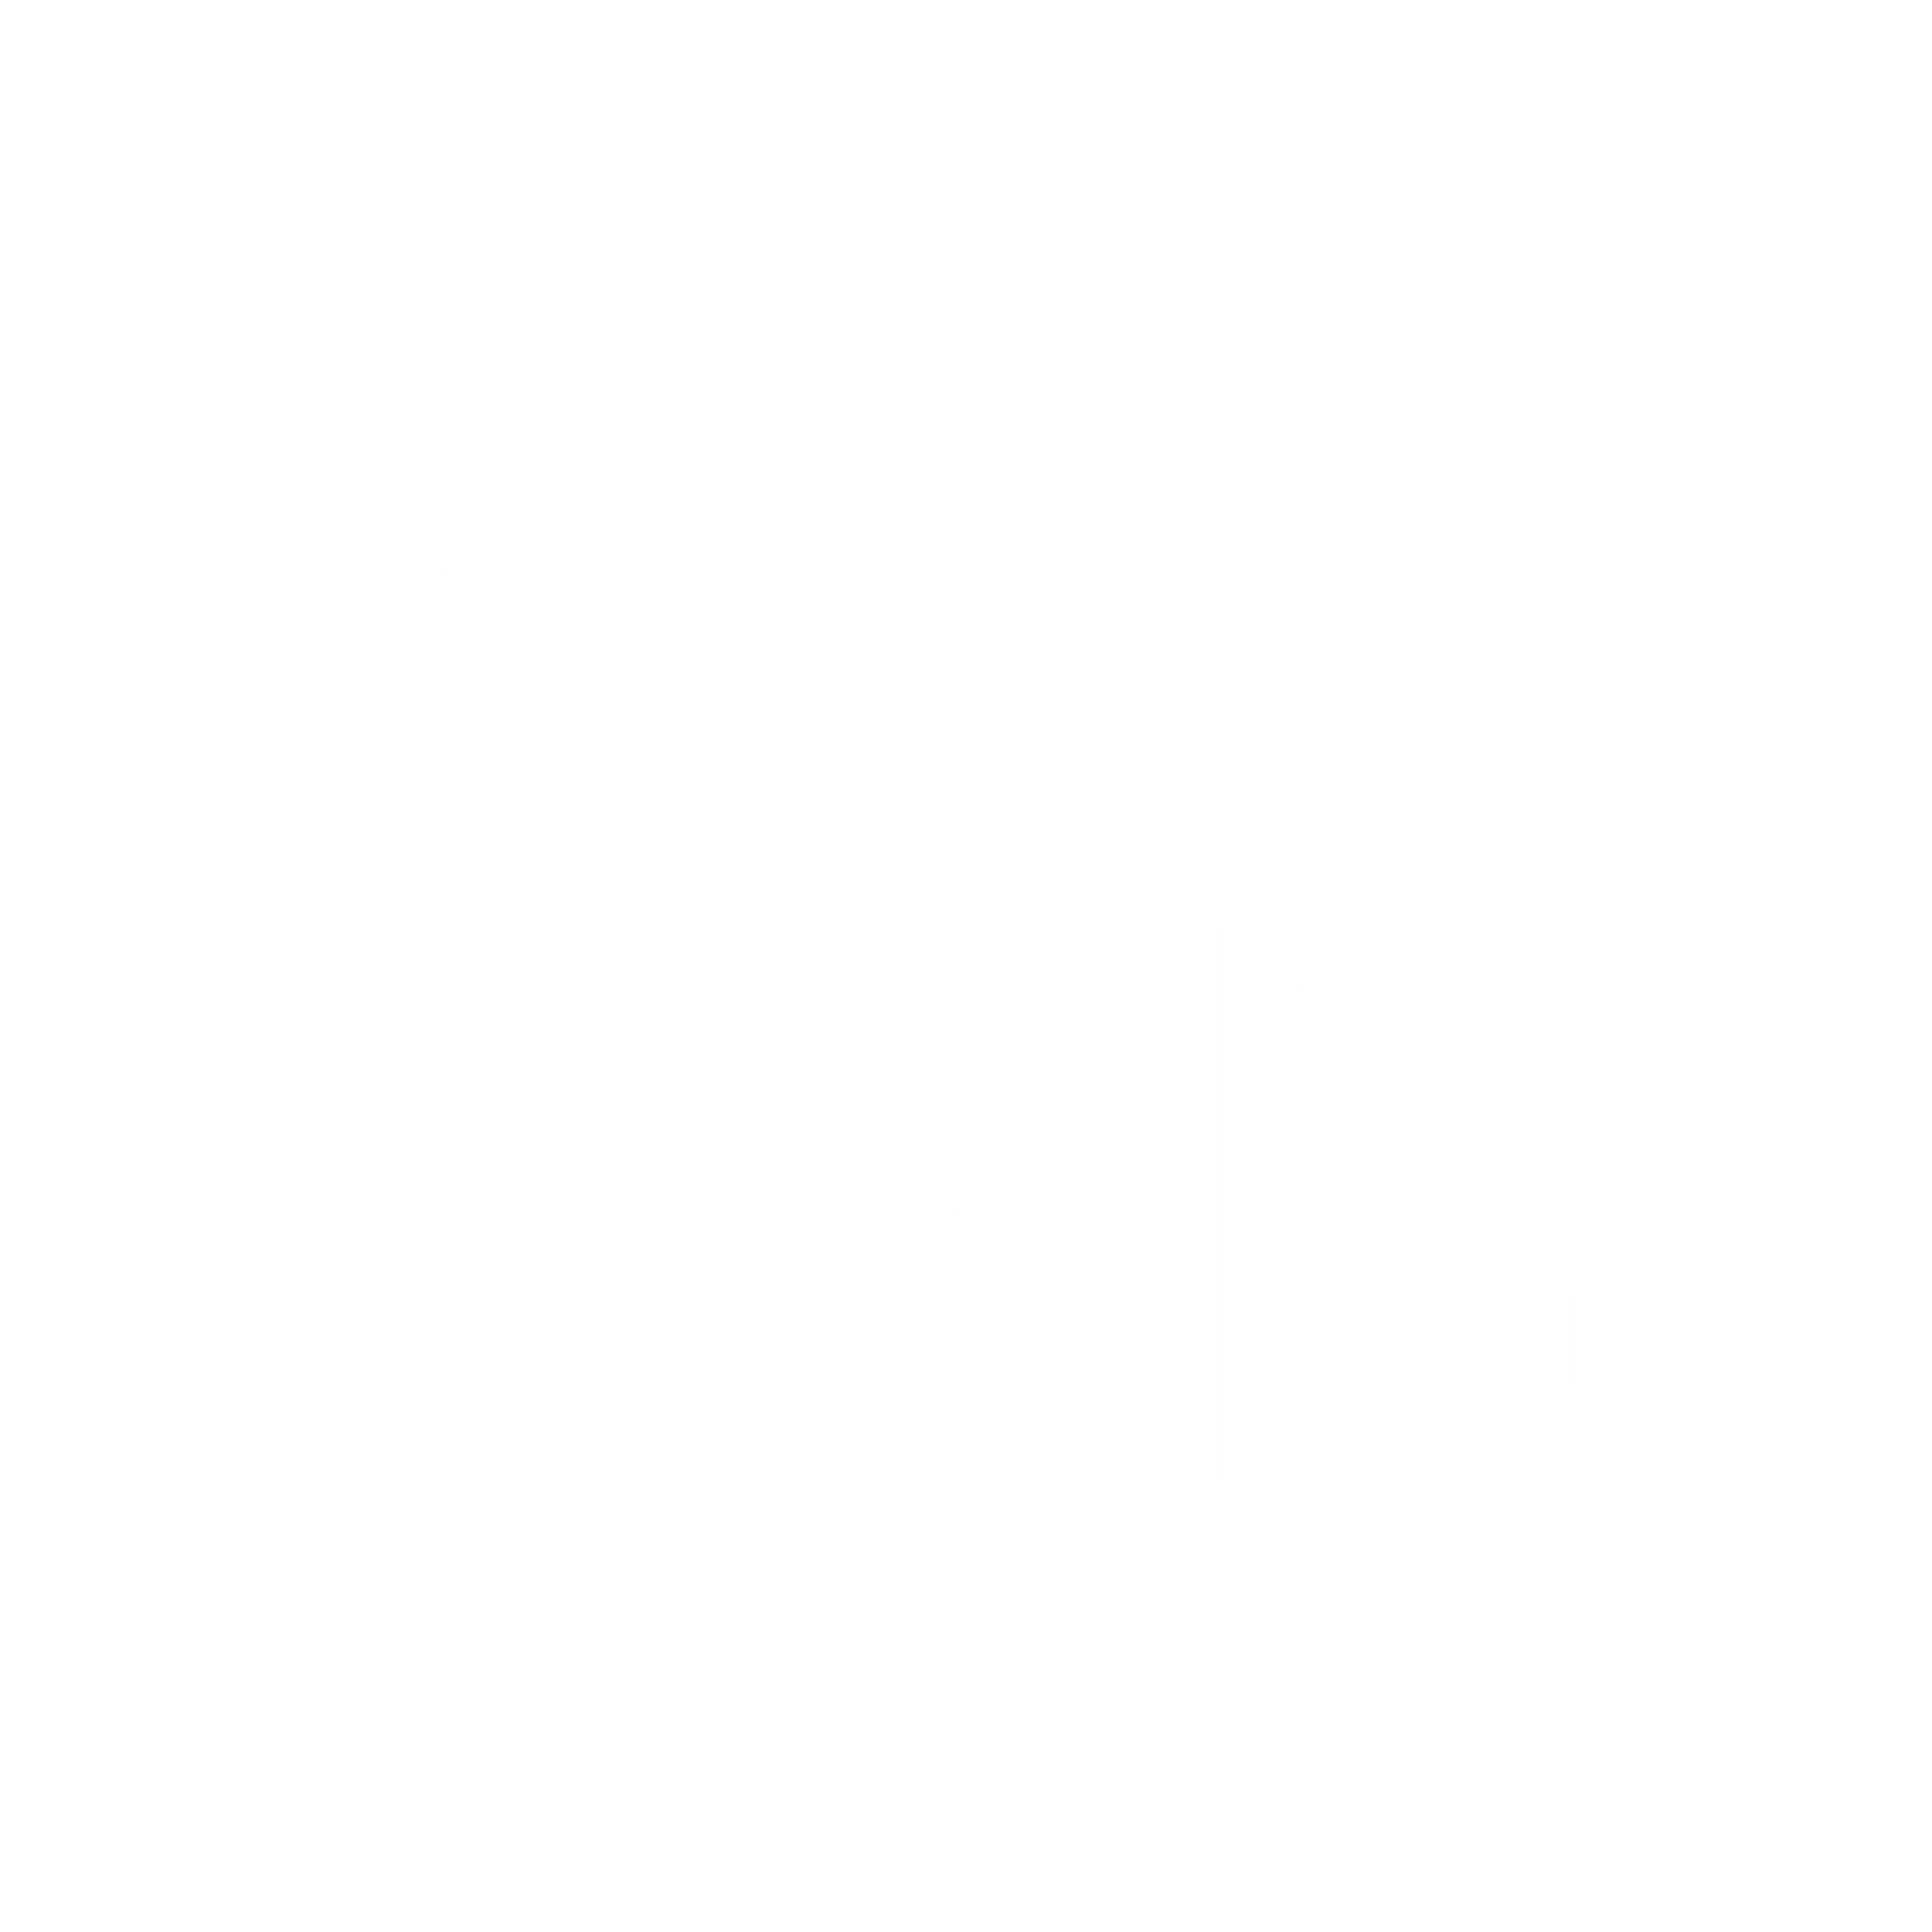 How To Pick Up Chicks - Roadkill T Shirts